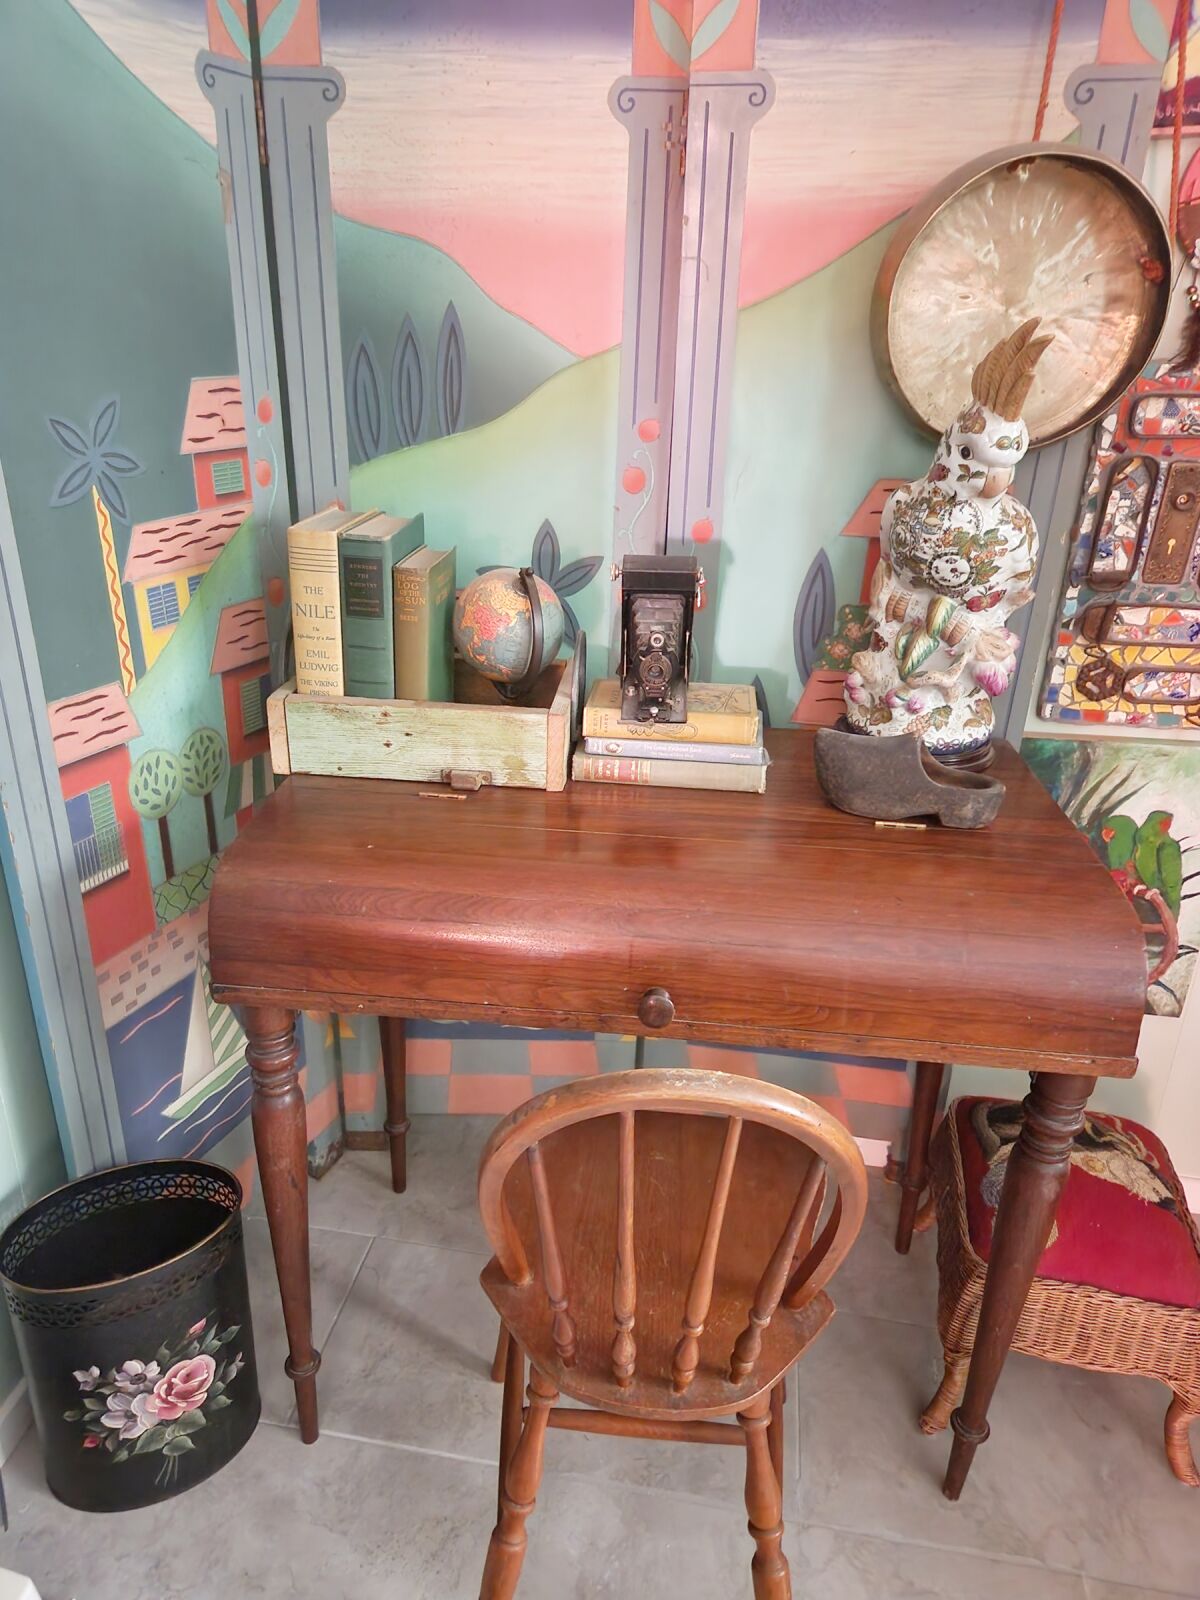 A desk and chair, books, folding screen and more vintage finds share the corner of a room with parrots.